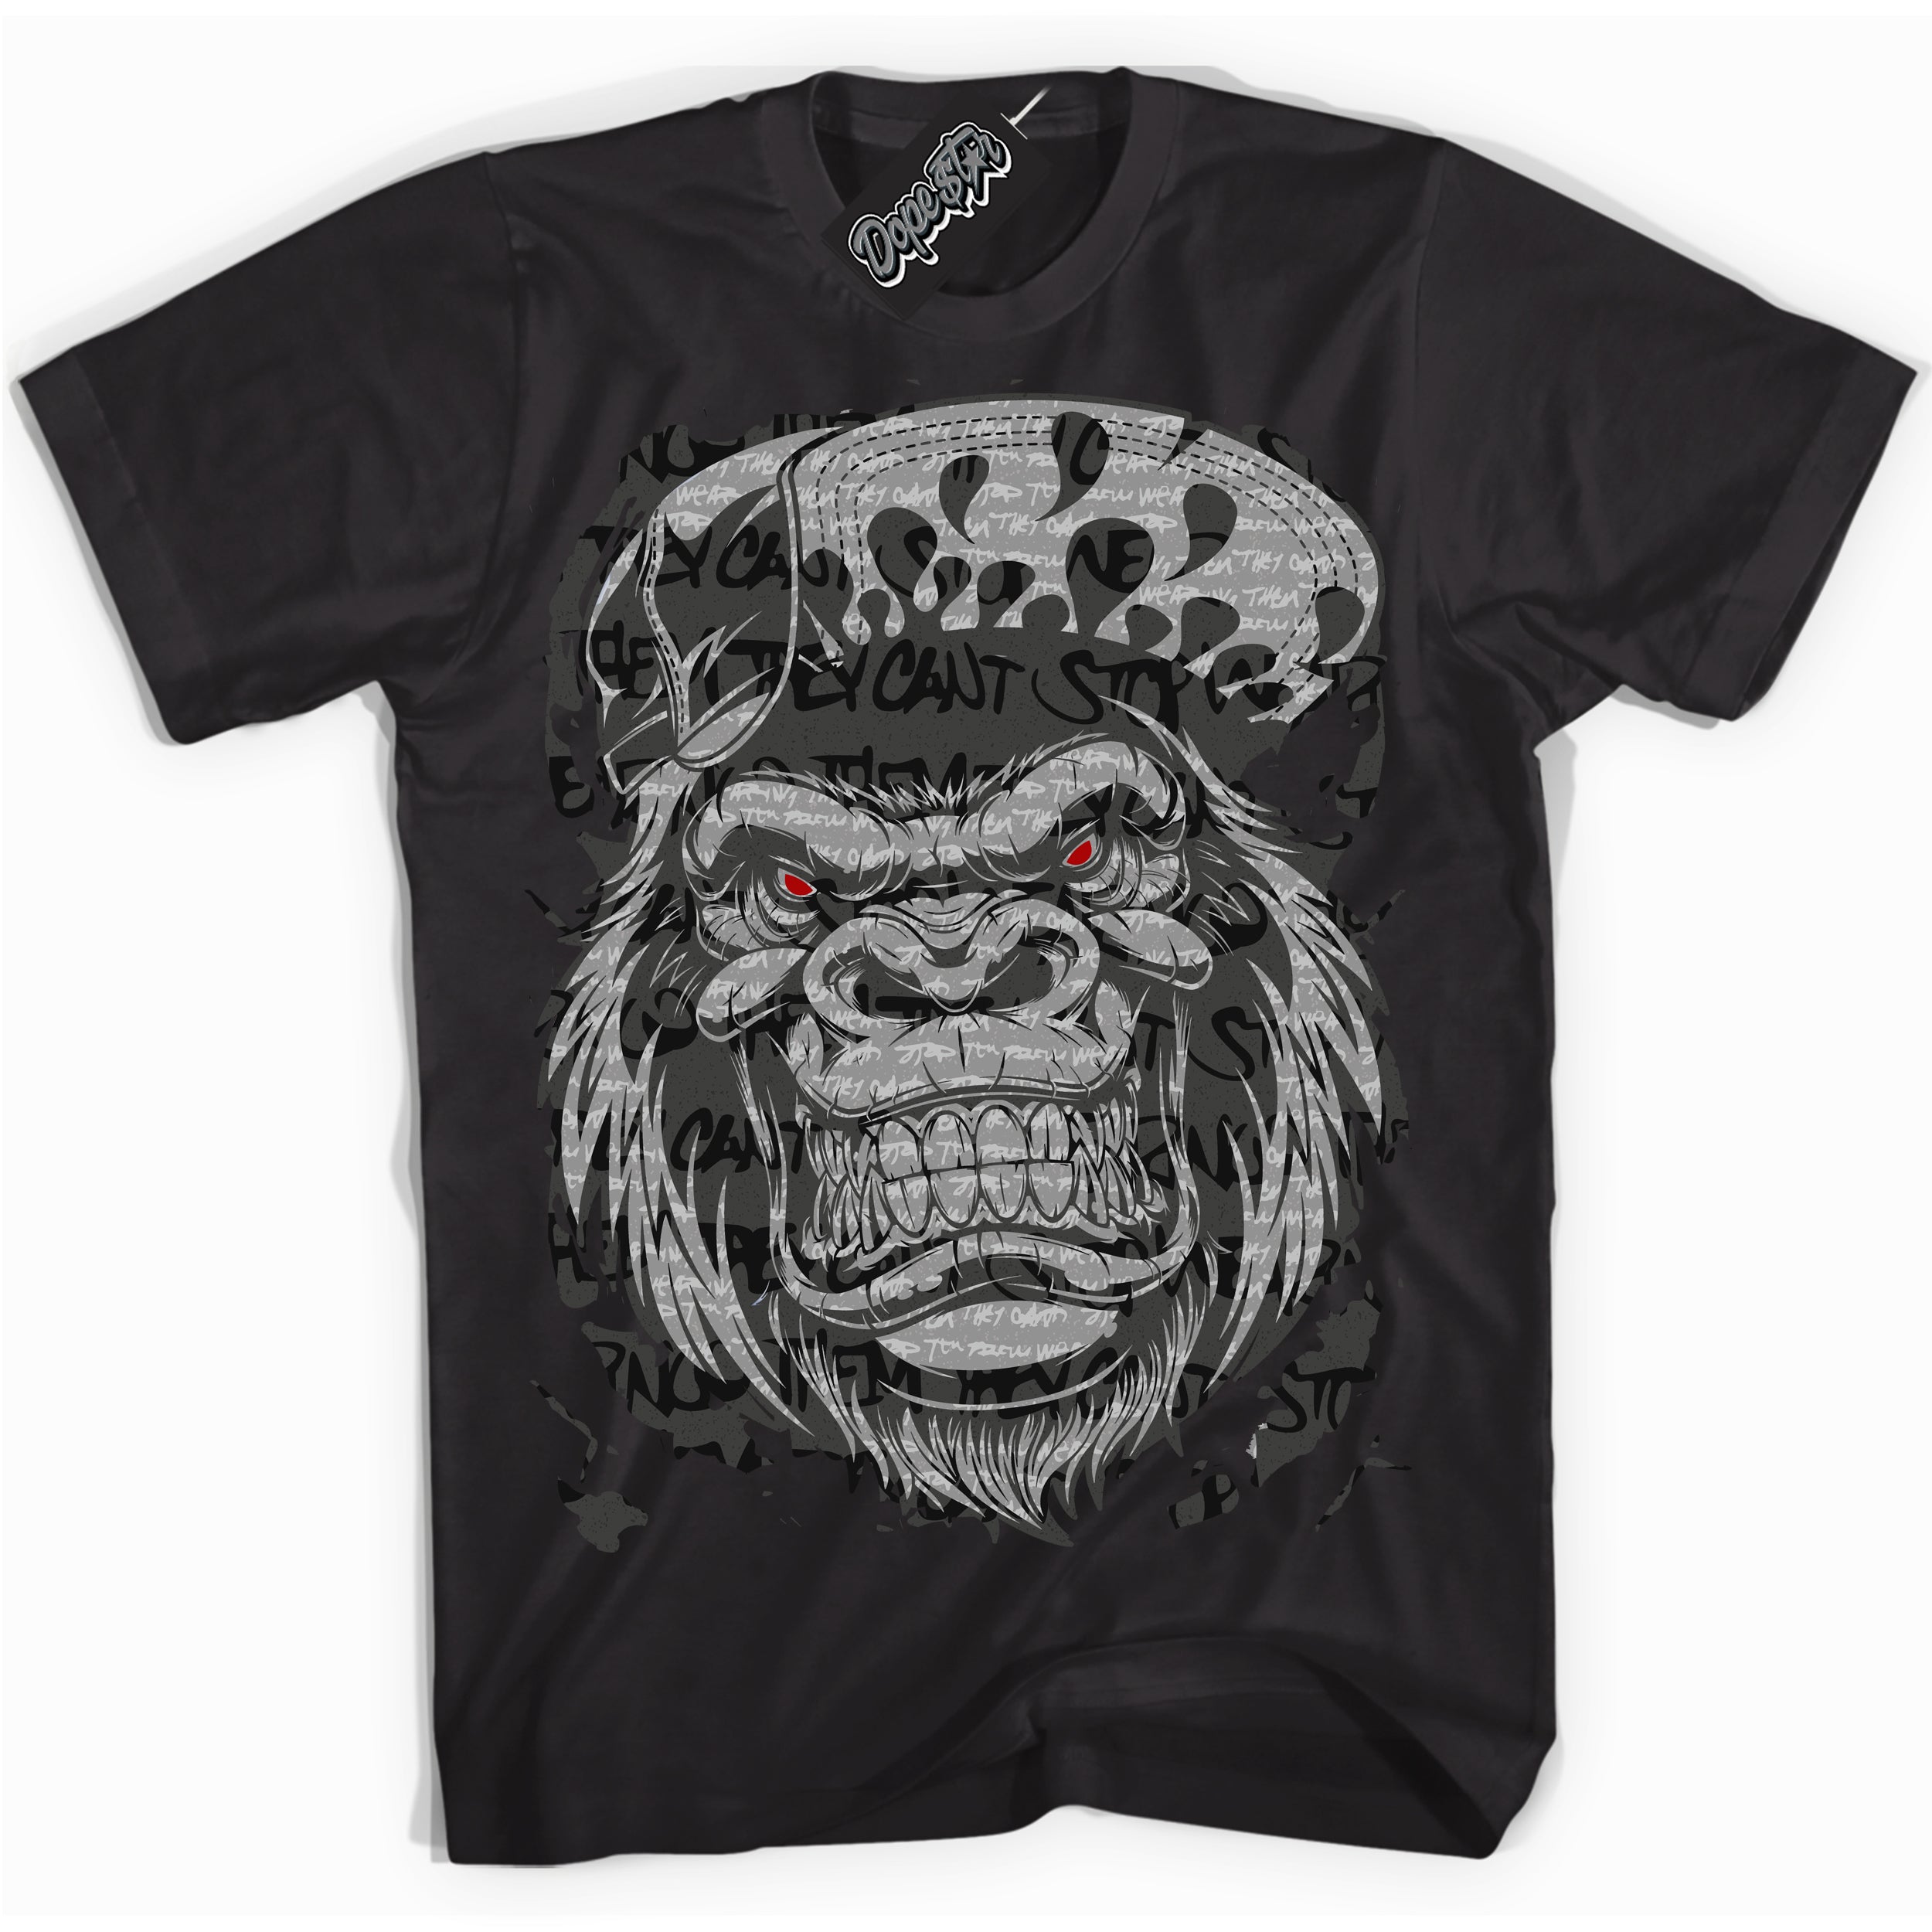 Cool Black Shirt with “ Gorilla Beast ” design that perfectly matches Rebellionaire 1s Sneakers.